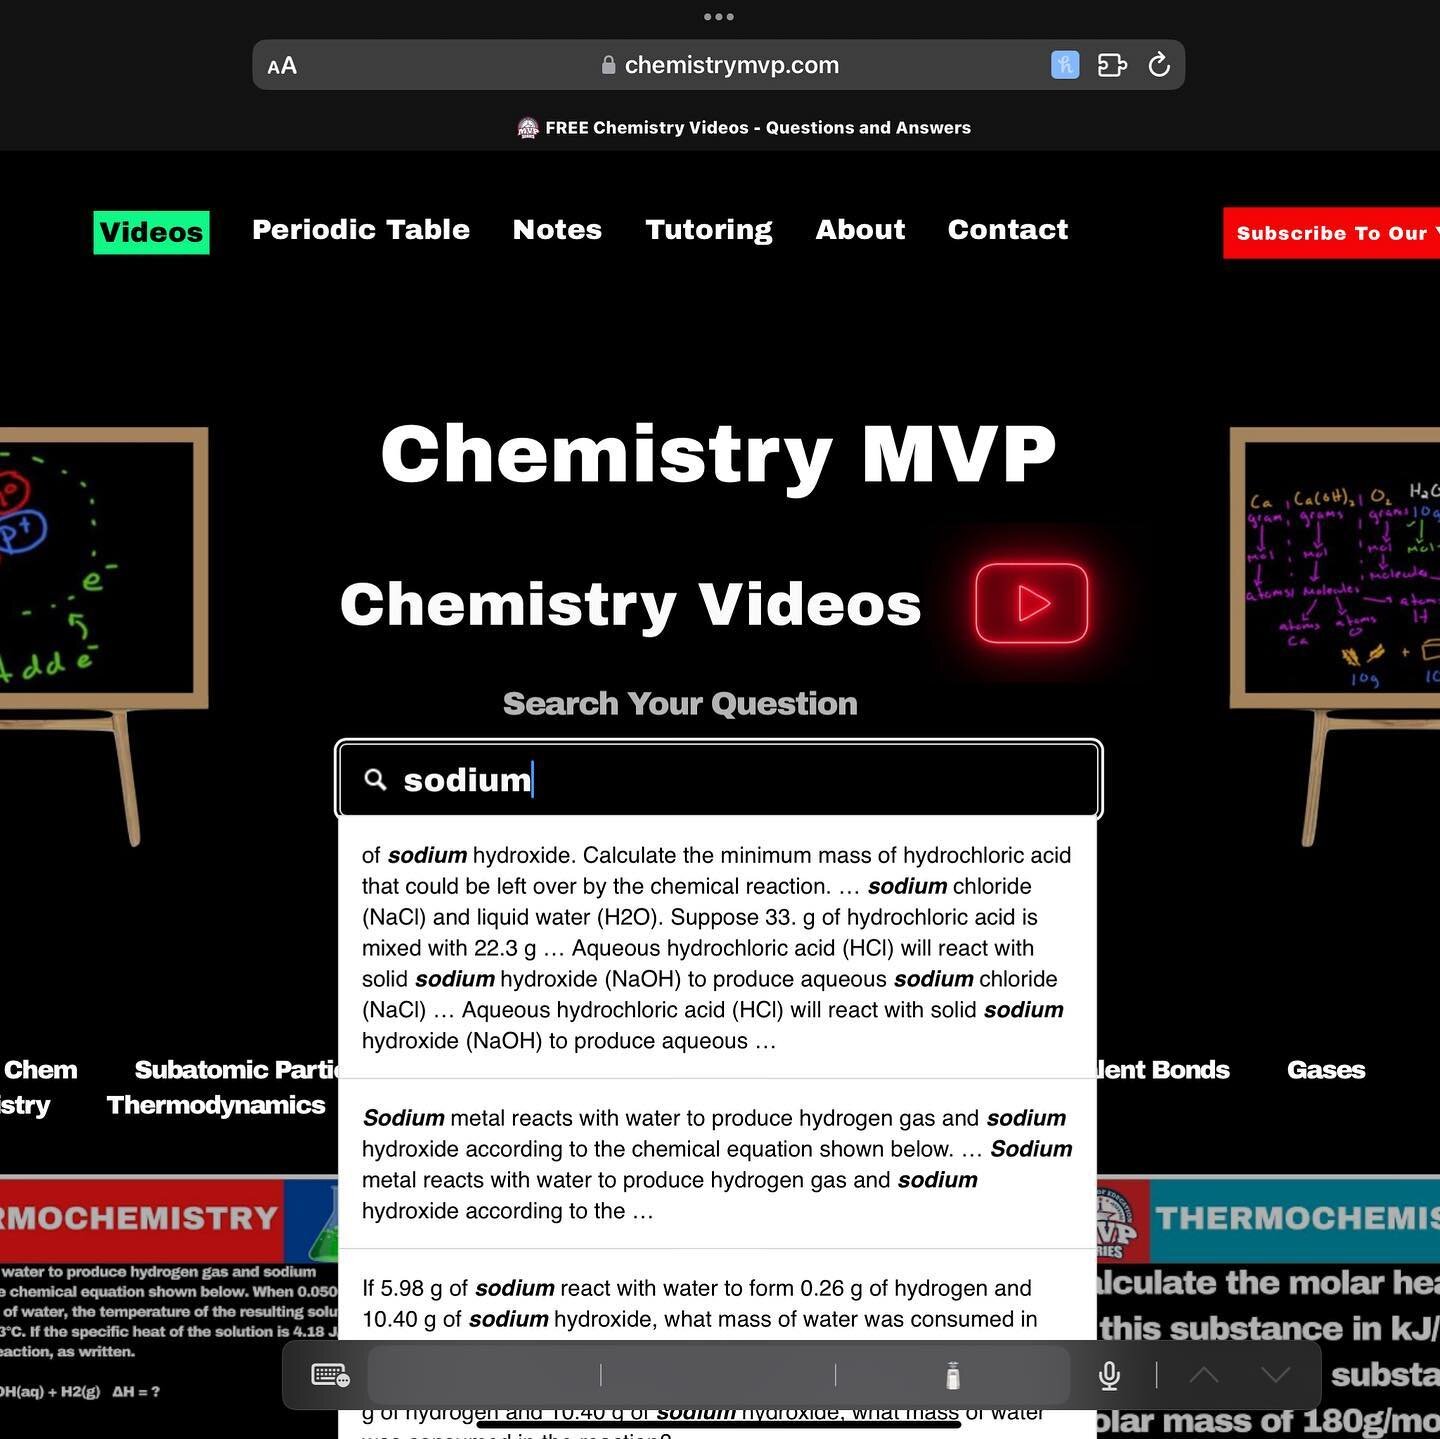 If you visit my website you can search for topics in the search bar for relevant questions with a video explanation and walk through. #chemistry #apchem